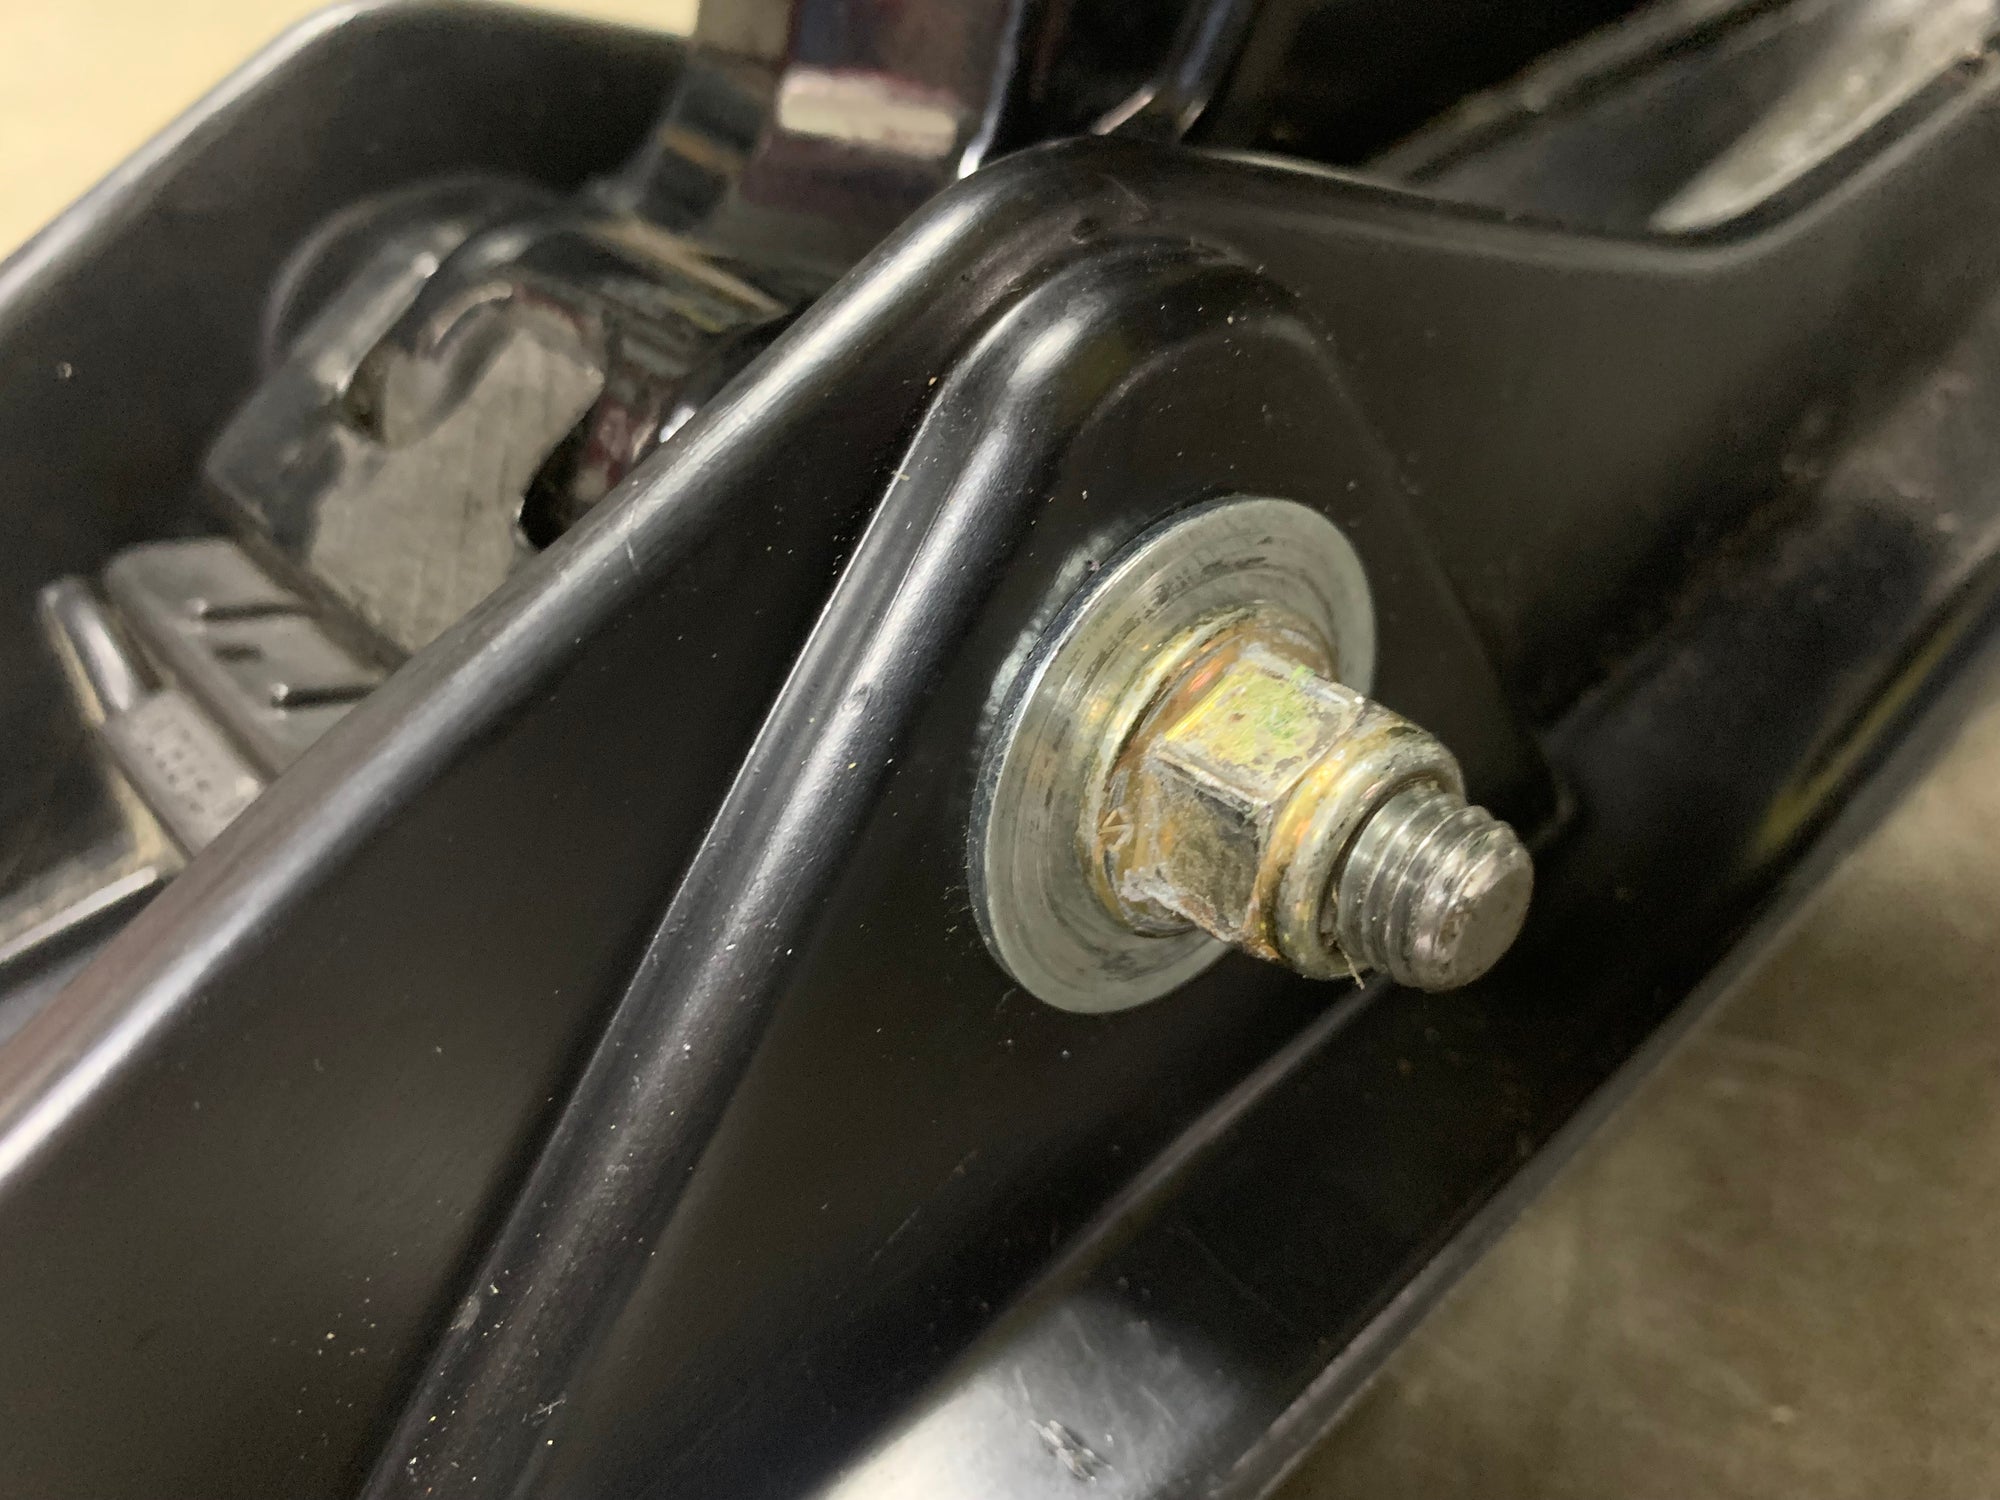 My Ski-Doo snowmobile doesn't have a washer on the ski bolt?